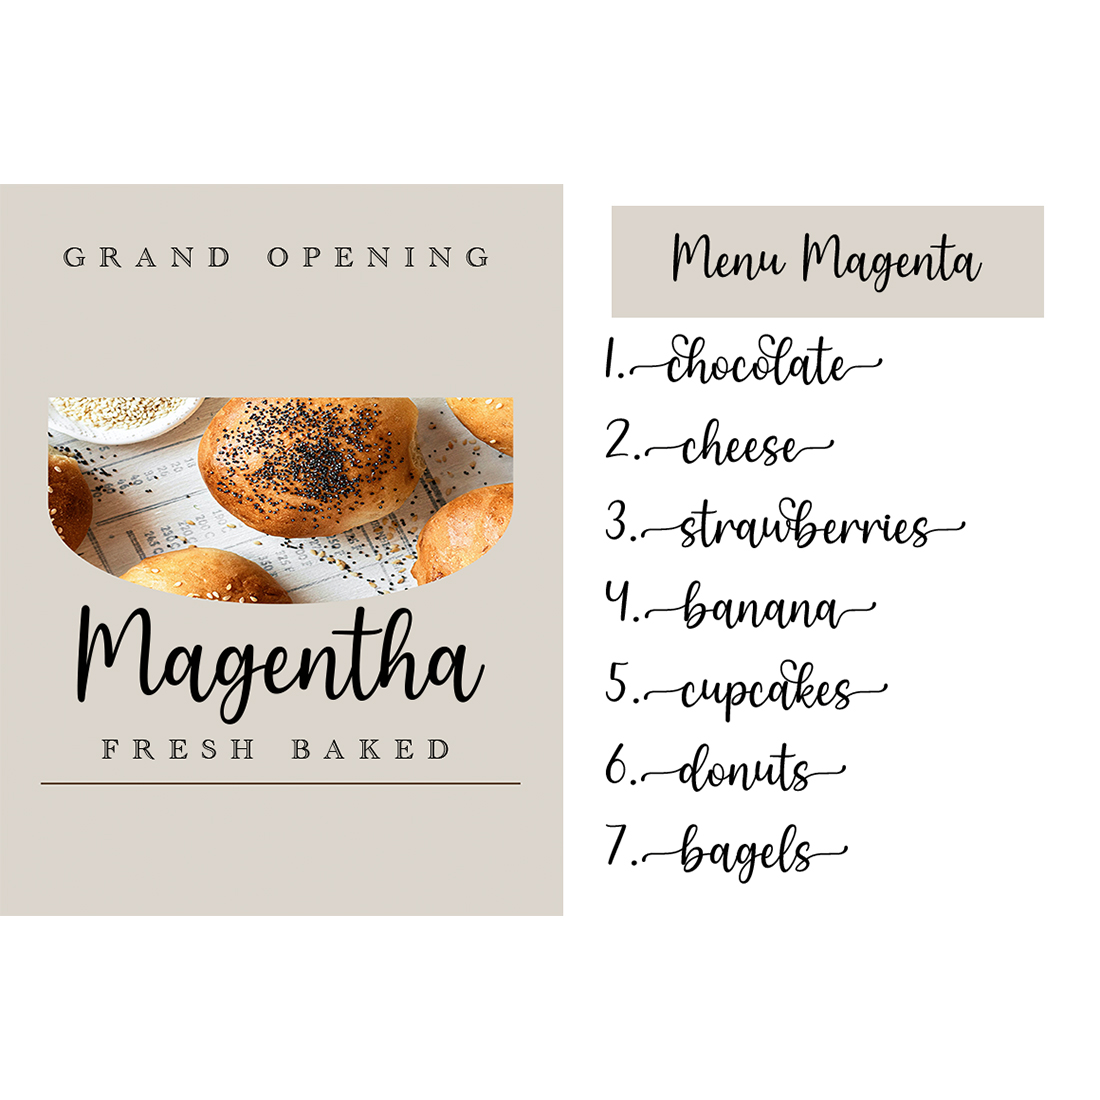 Magentha Chocolate preview image.